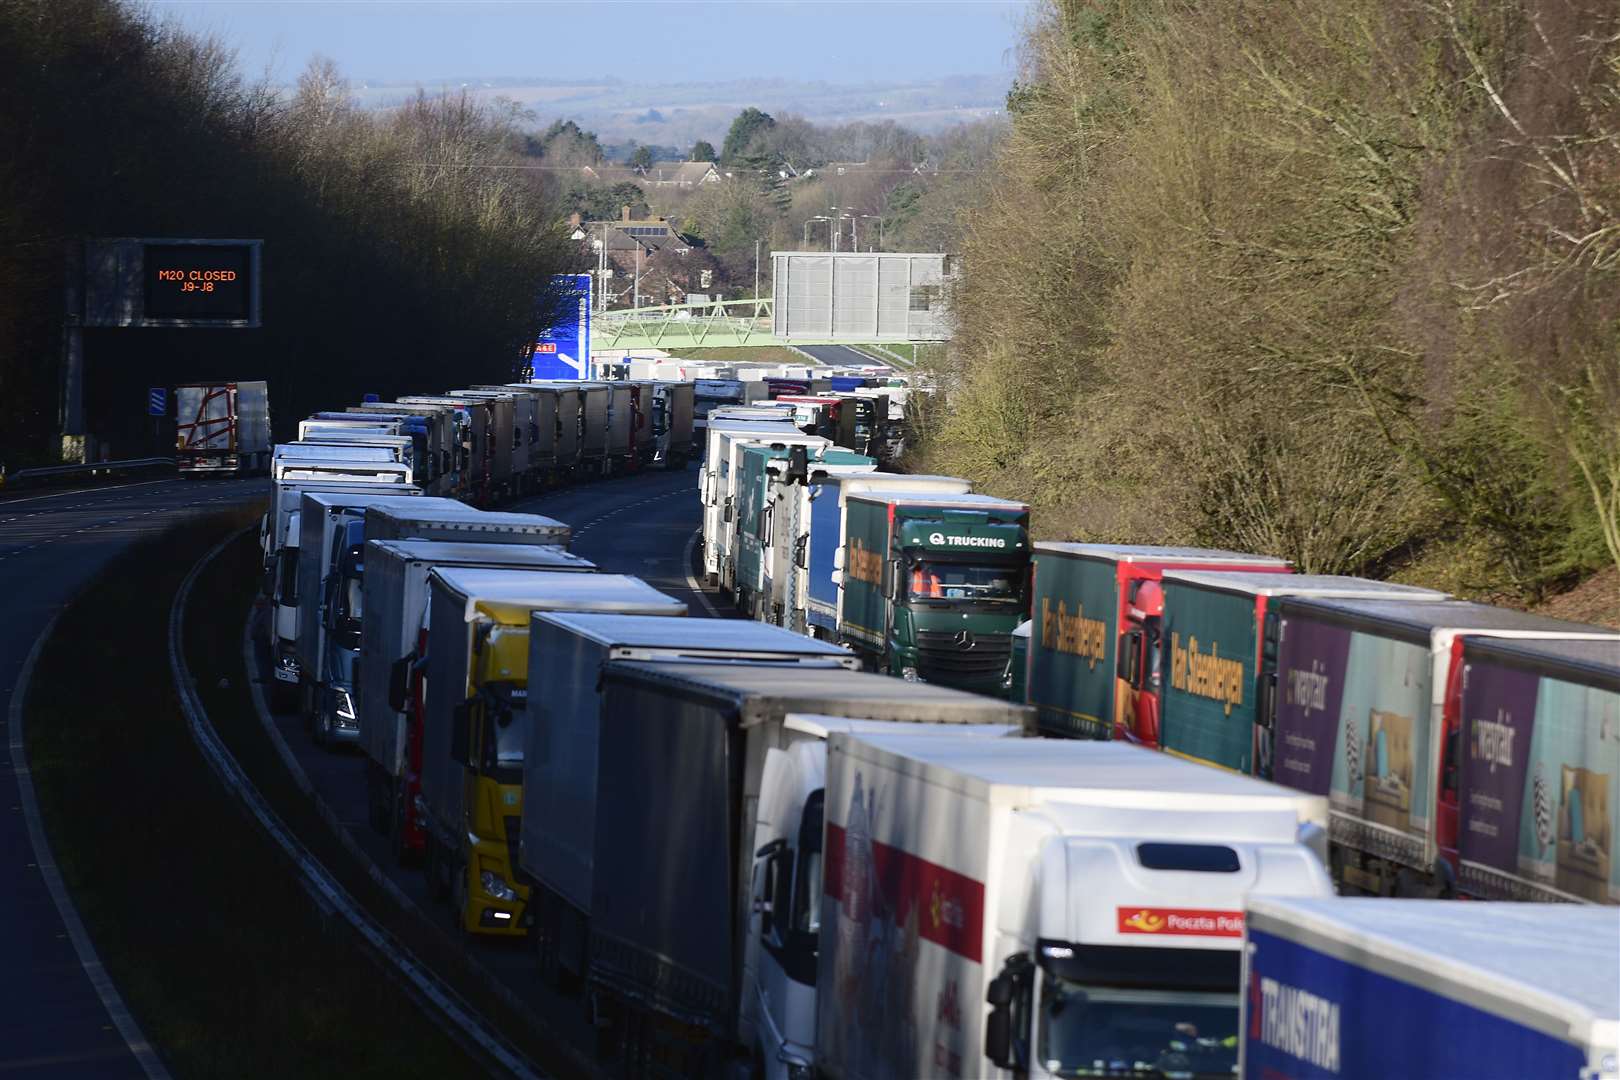 Operation Stack caused caused chaos - correctly identified by our bot friend. Picture: Barry Goodwin